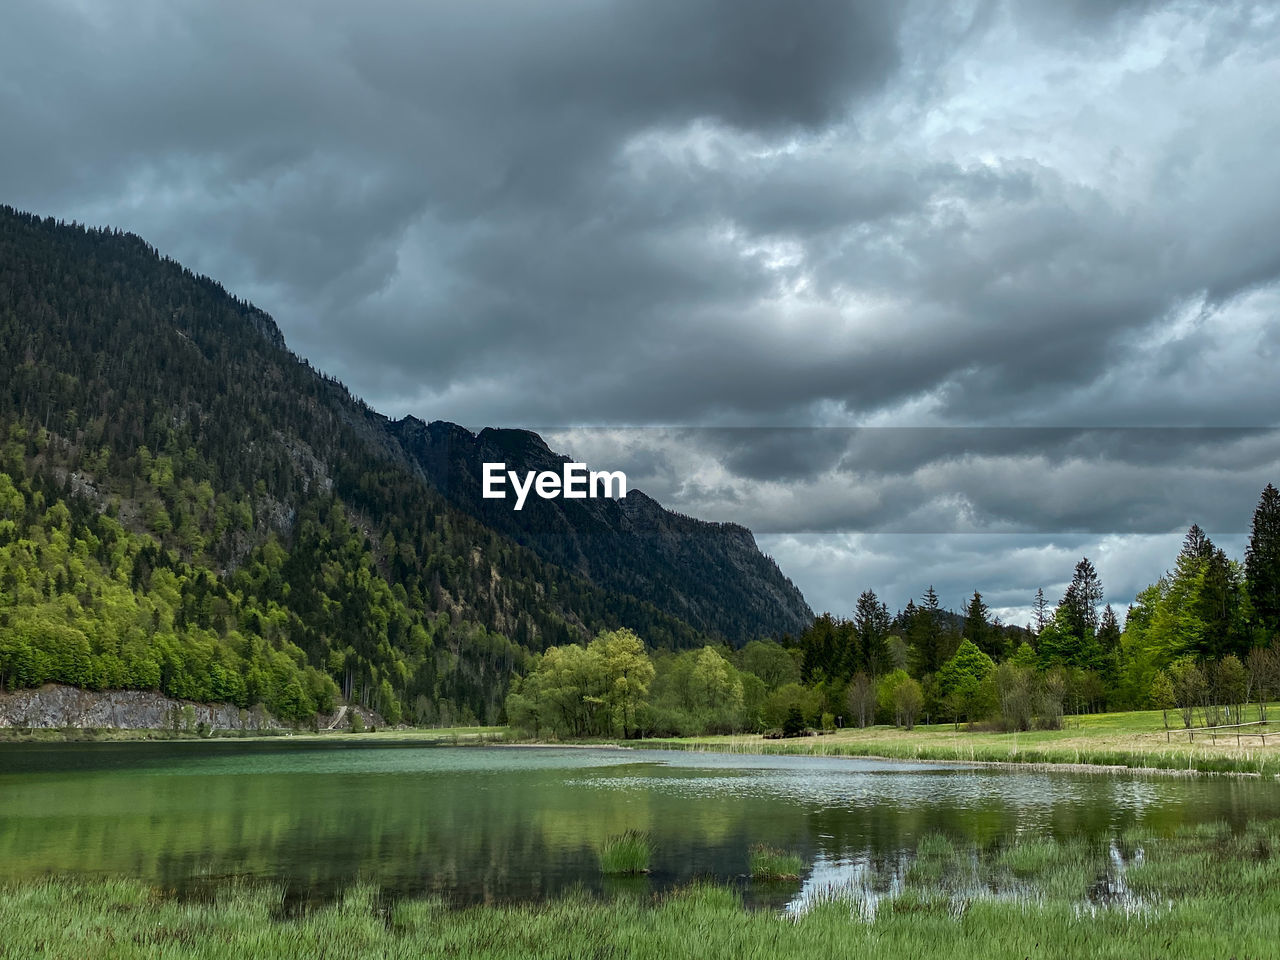 Scenic view of lake and mountains against cloudy sky at dreiseengebiet, bavaria